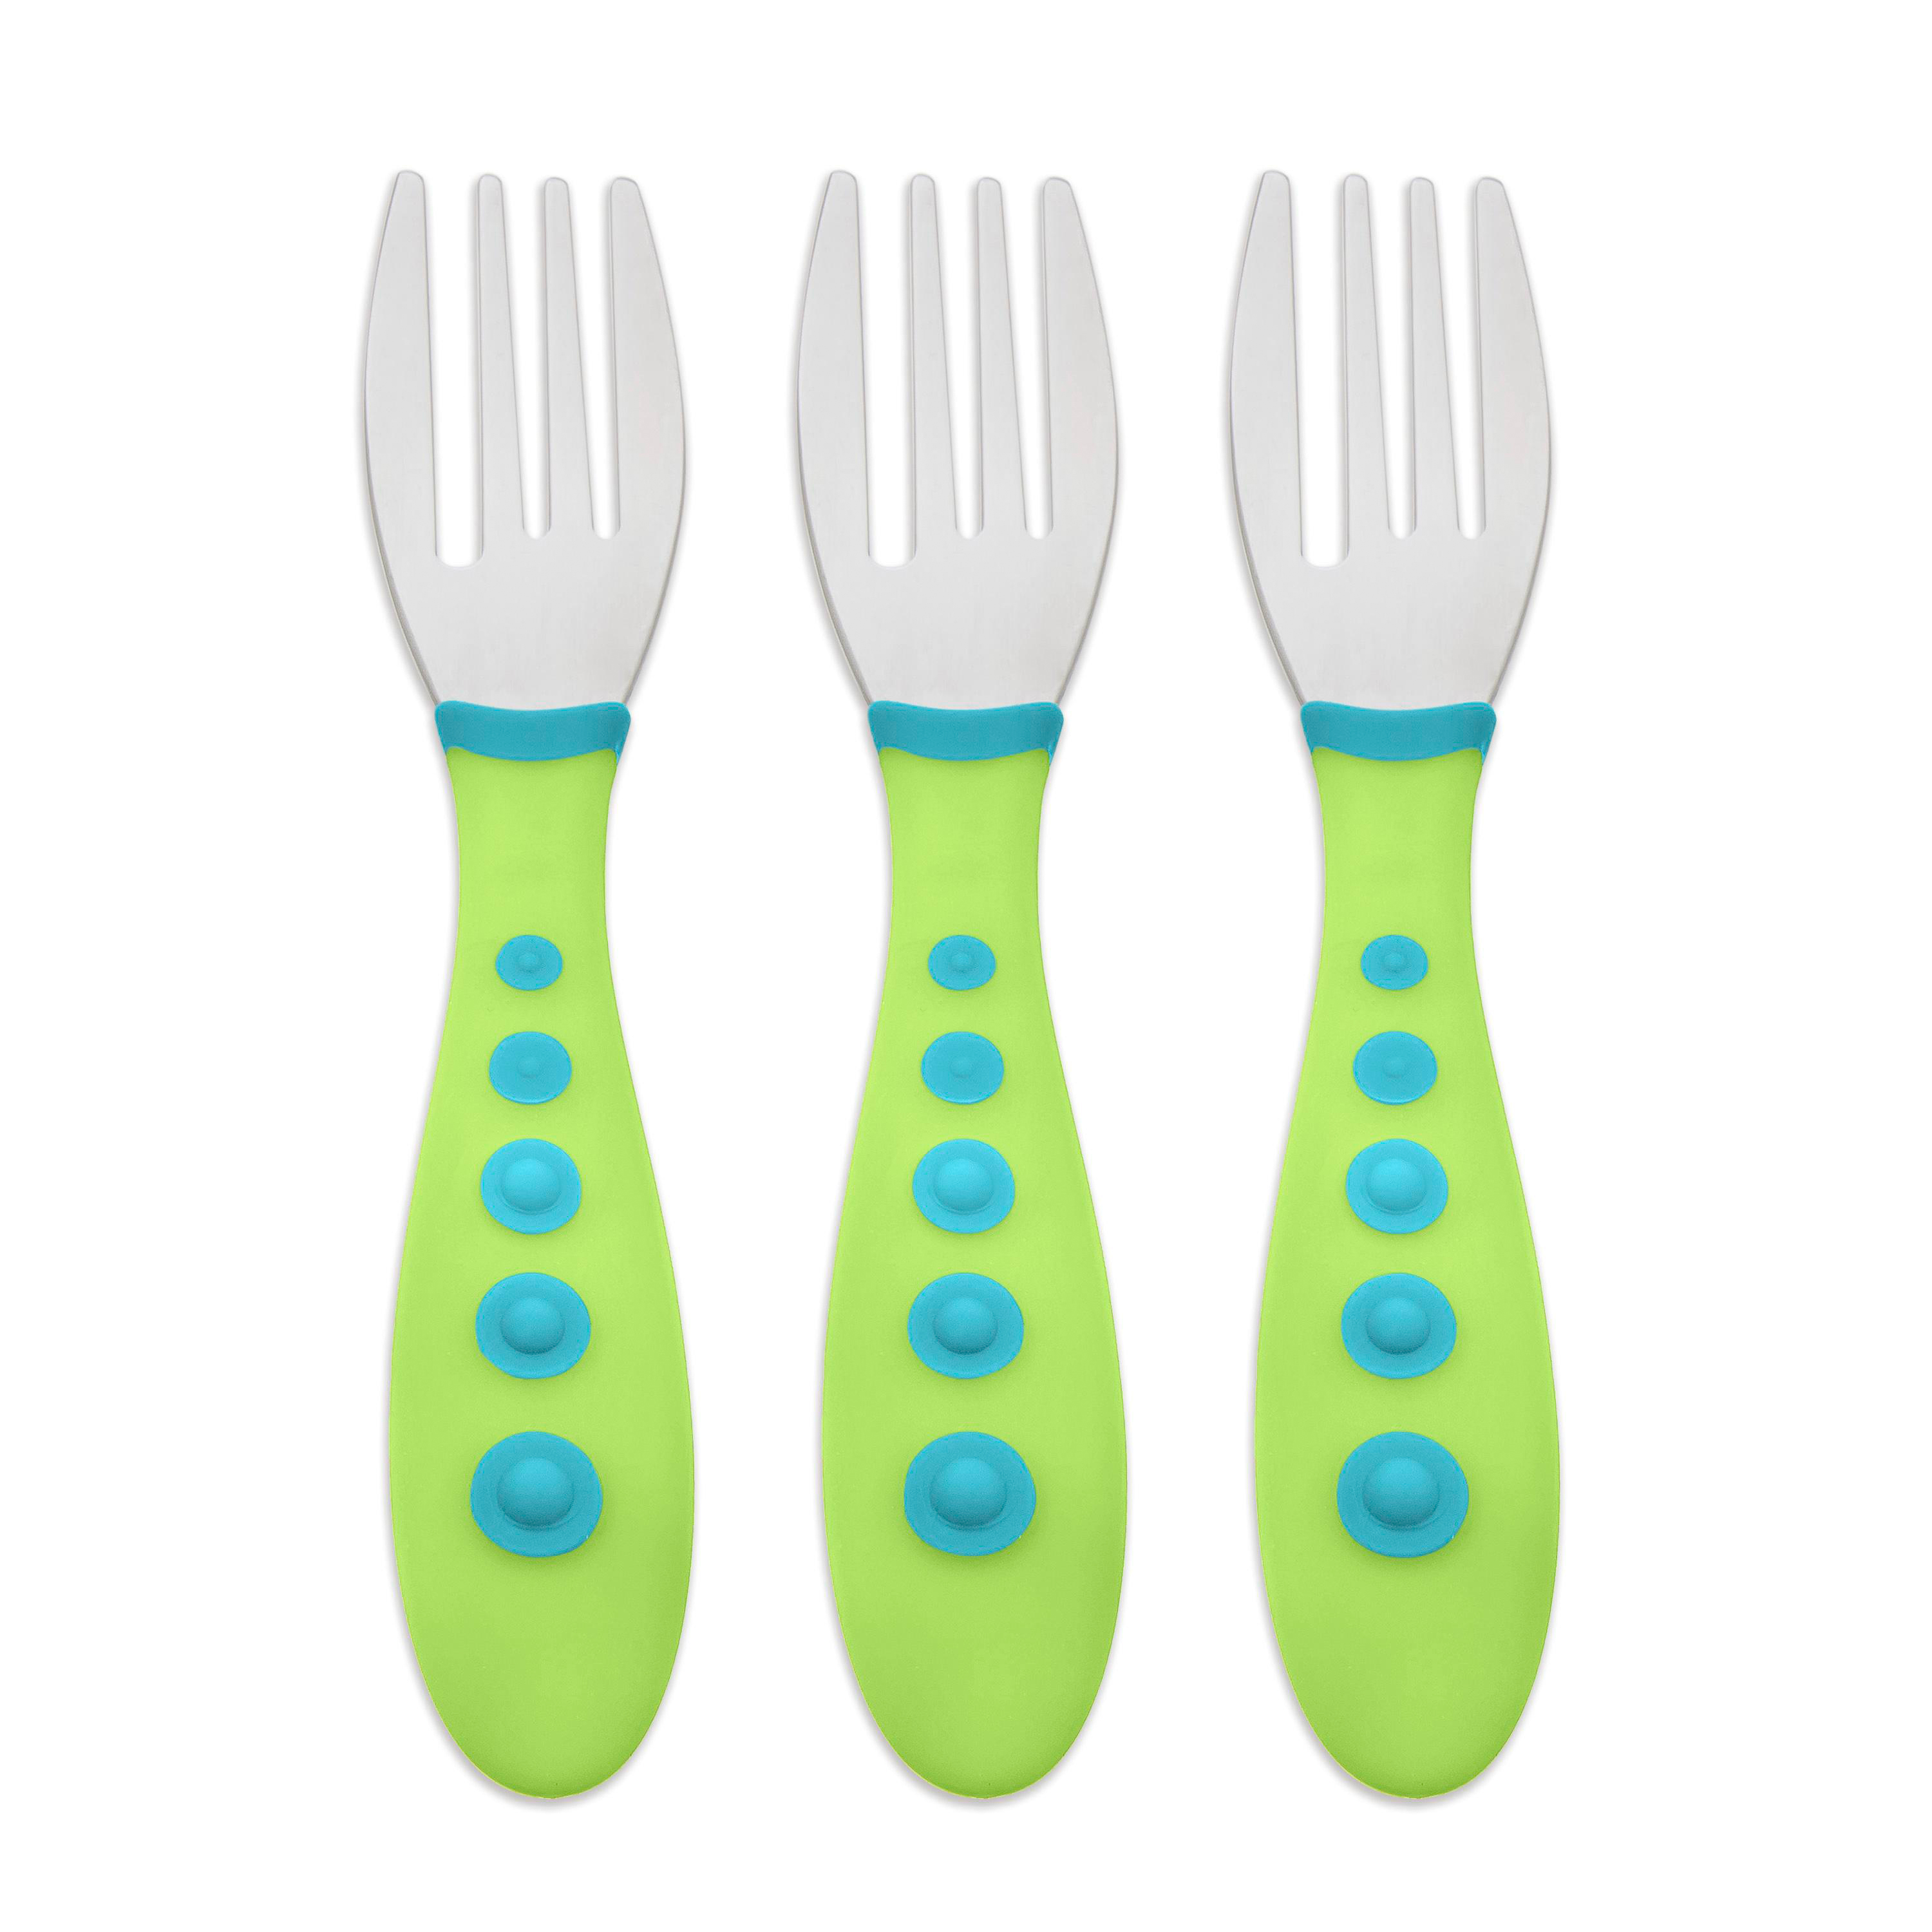 First Essentials by NUK Kiddy Cutlery Forks, 3-Pack, Green, Blue - image 1 of 6